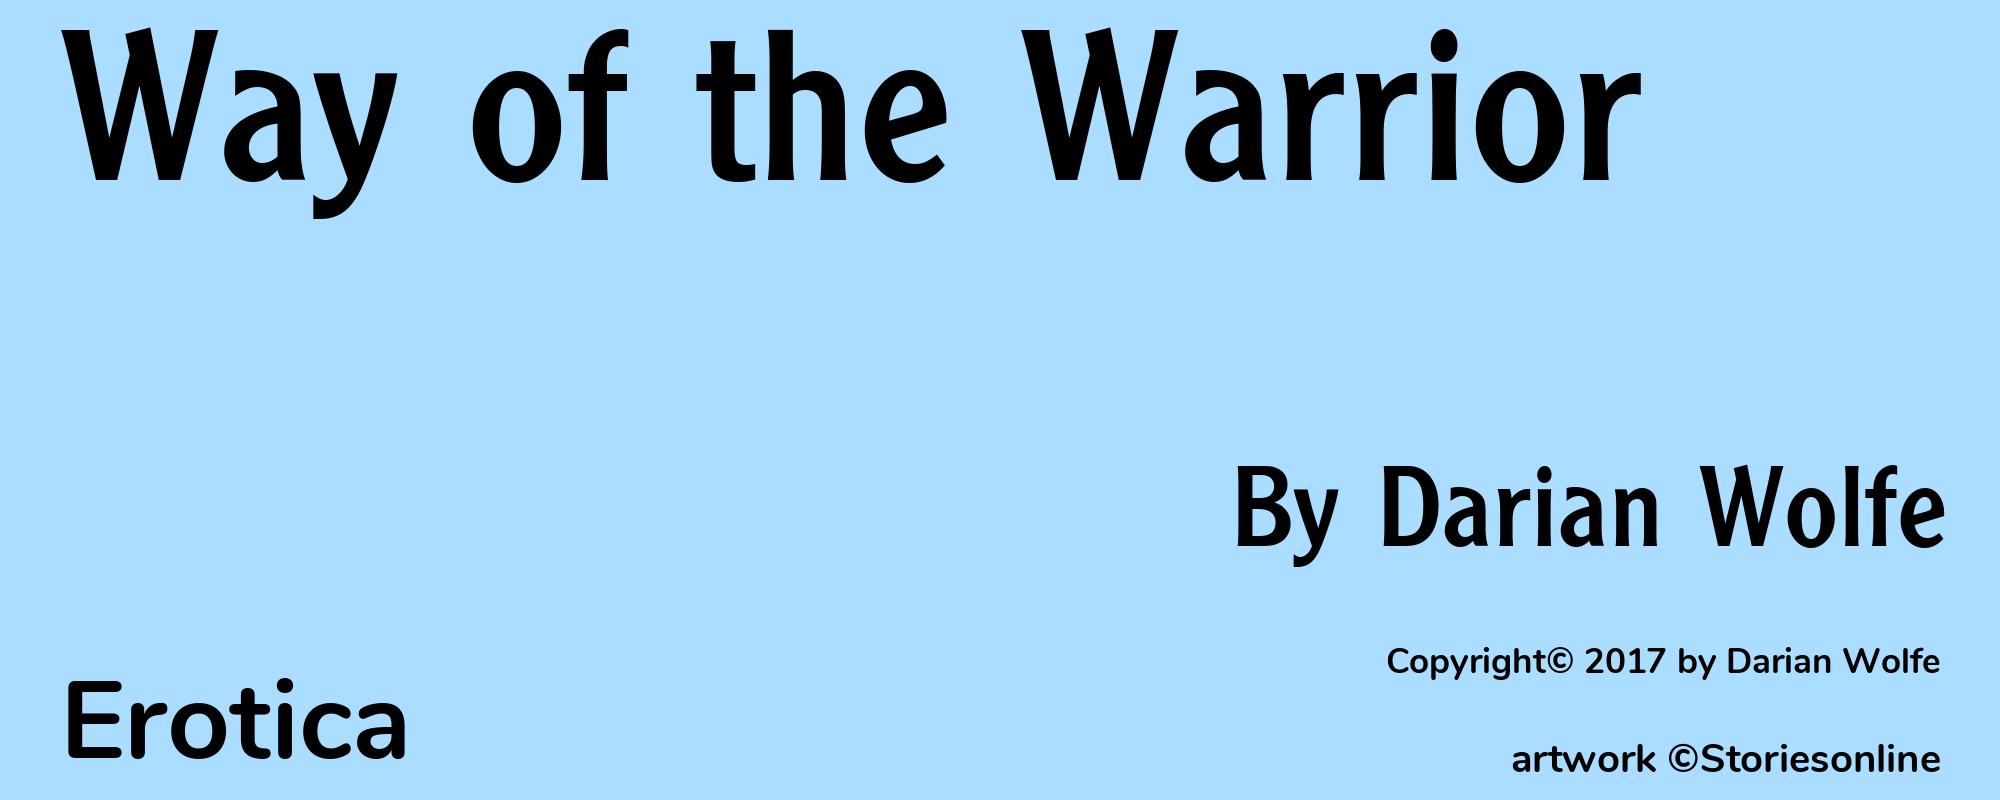 Way of the Warrior - Cover